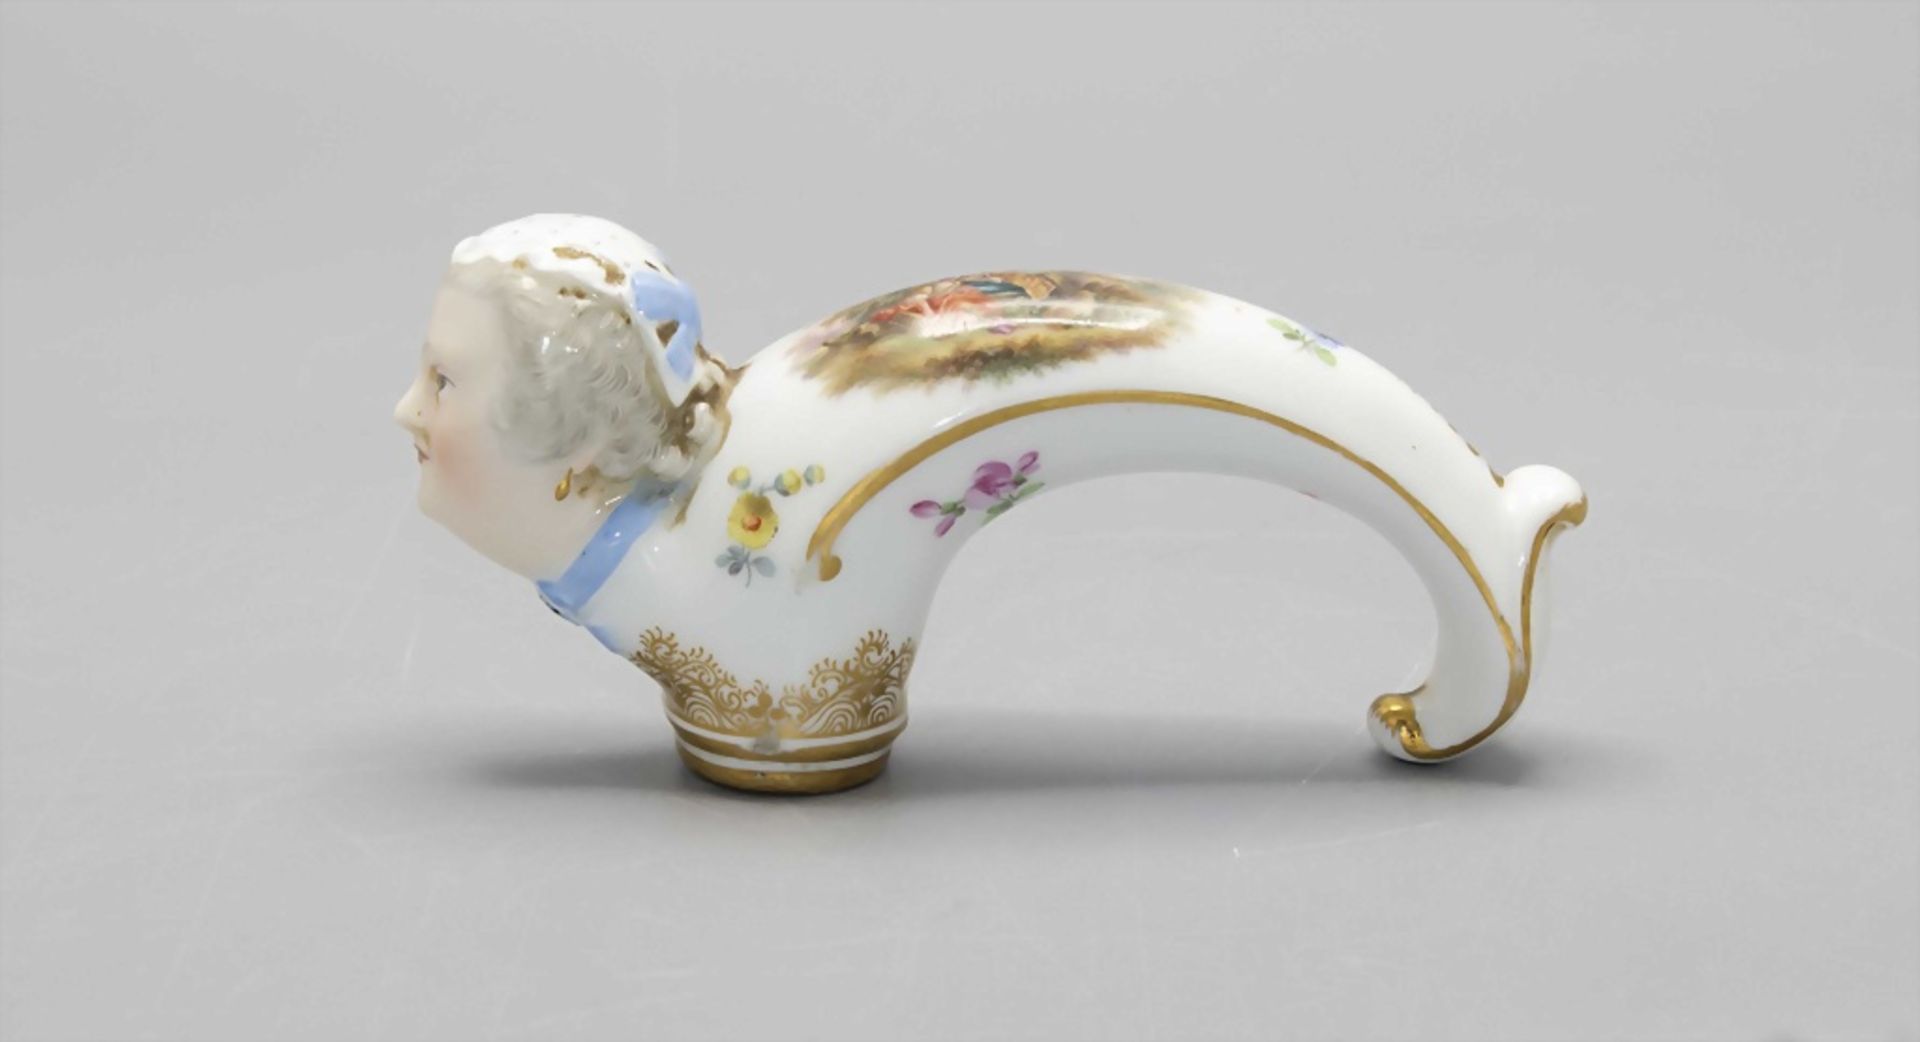 Stockgriff mit Frauenkopf und Watteau-Szene / A cane handle with the head of a woman and a ...